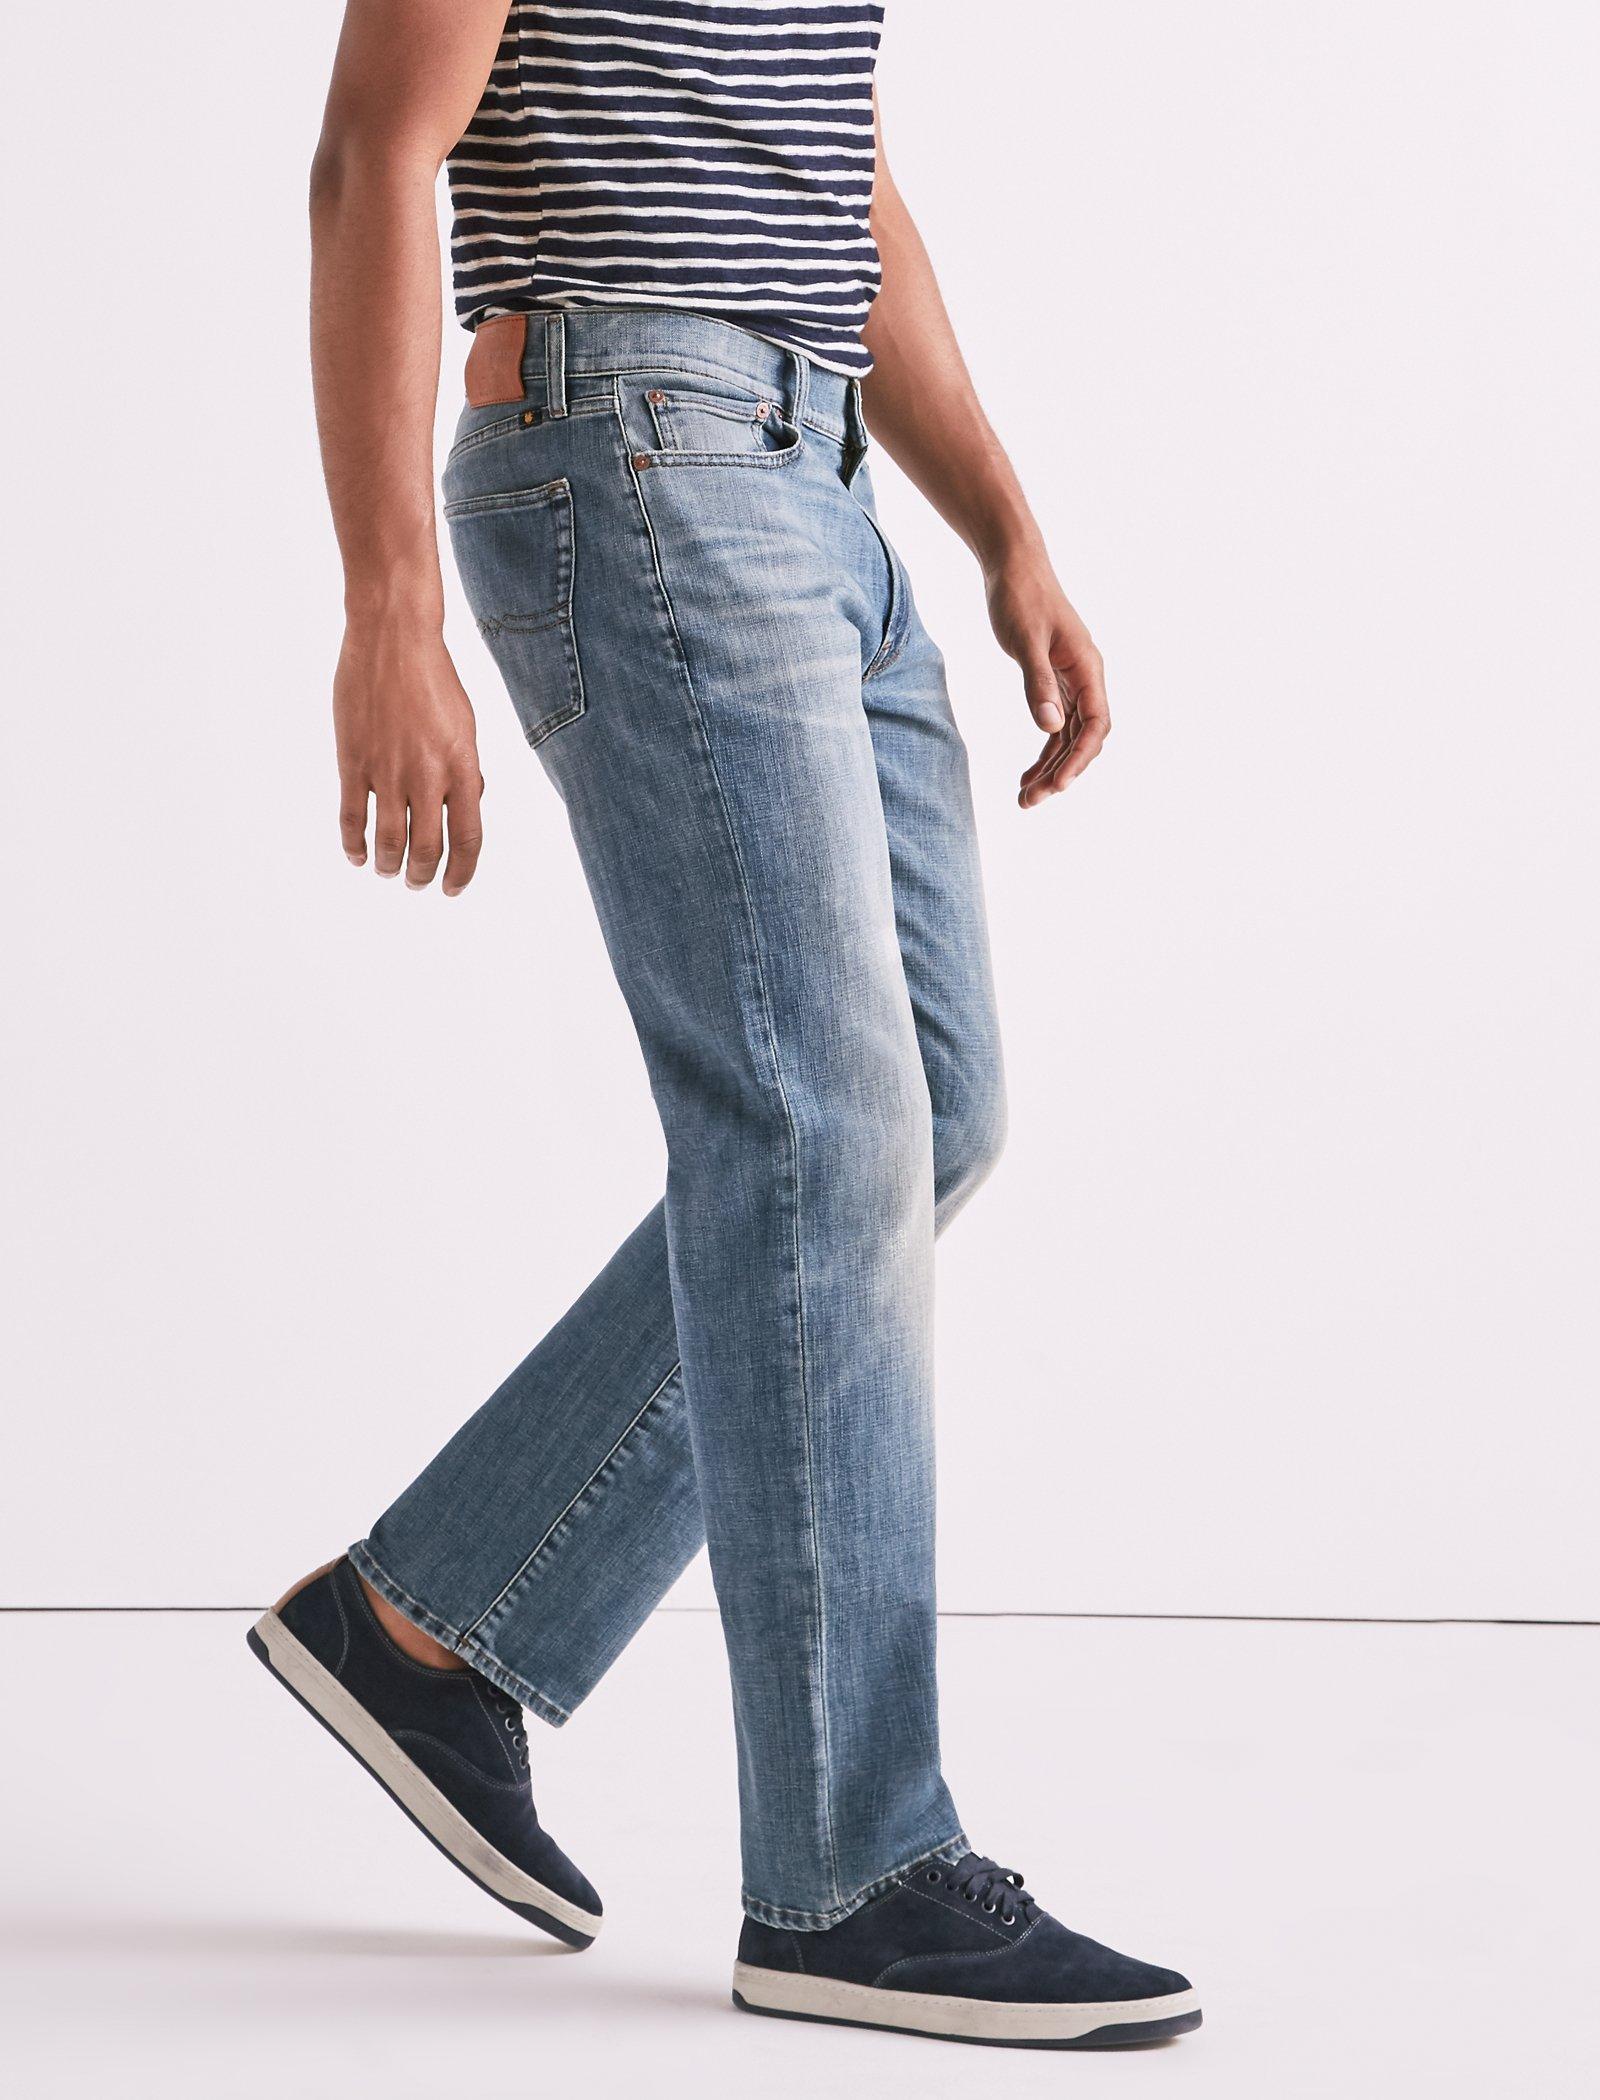 363 vintage straight lucky jeans